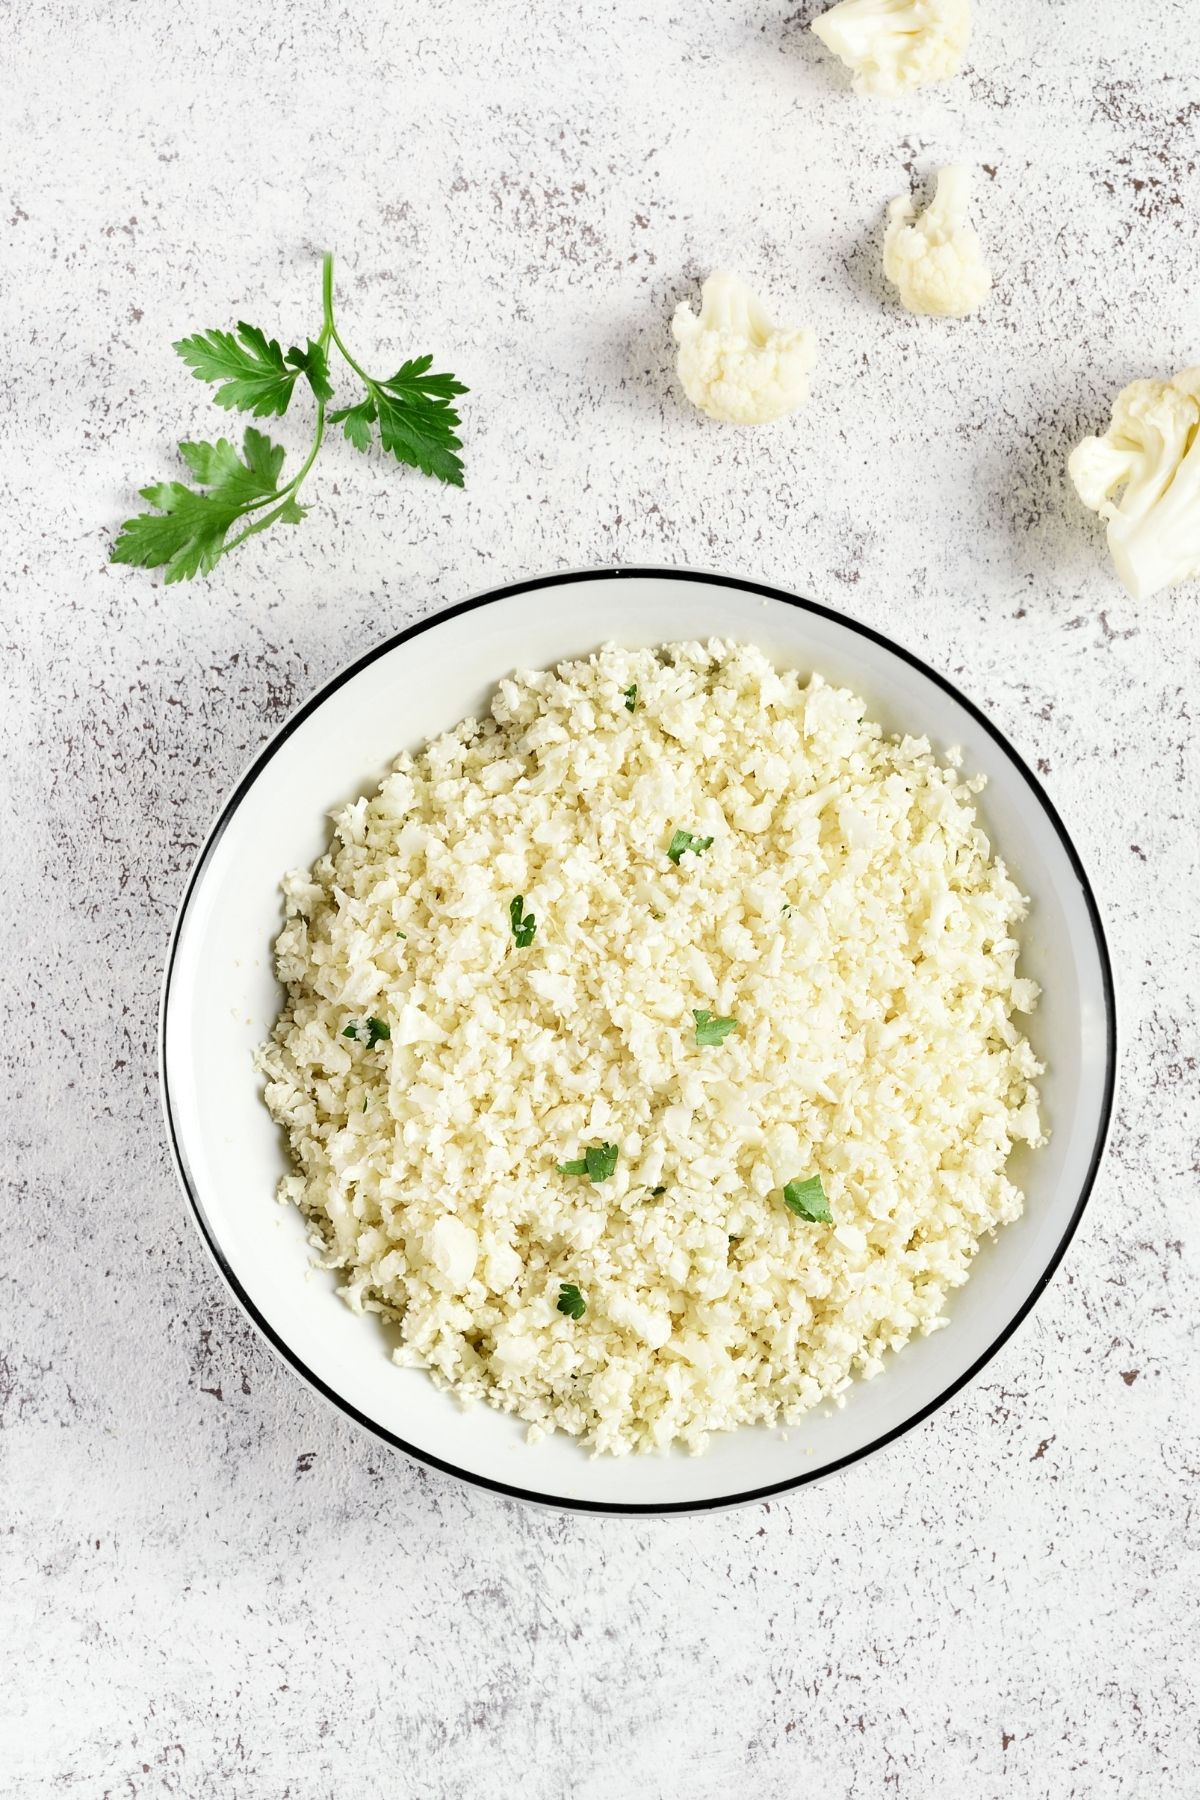 cauliflower rice in a white bowl sprinkled with parsley.